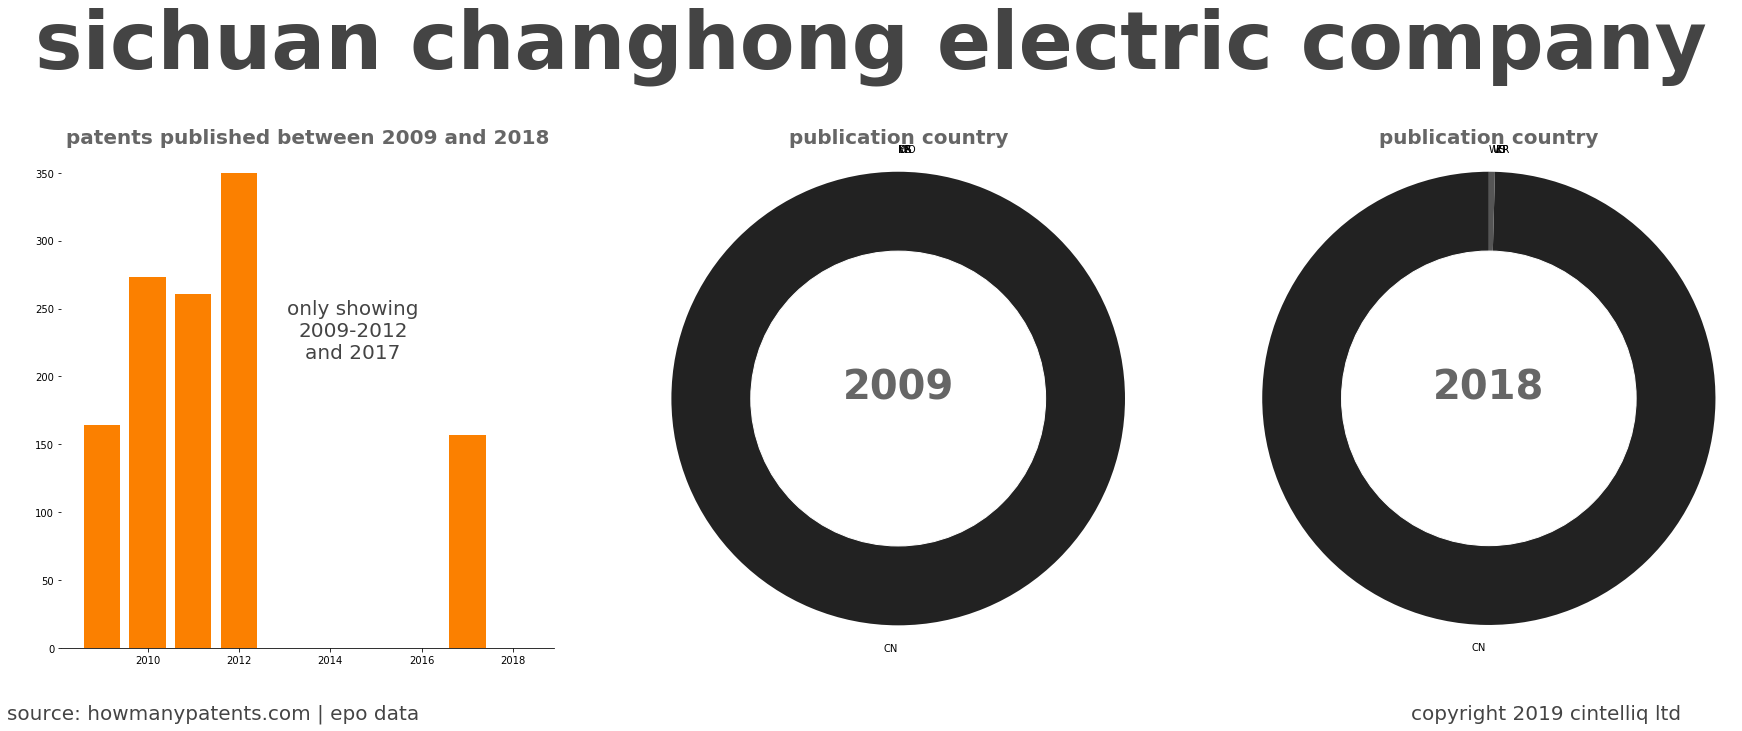 summary of patents for Sichuan Changhong Electric Company